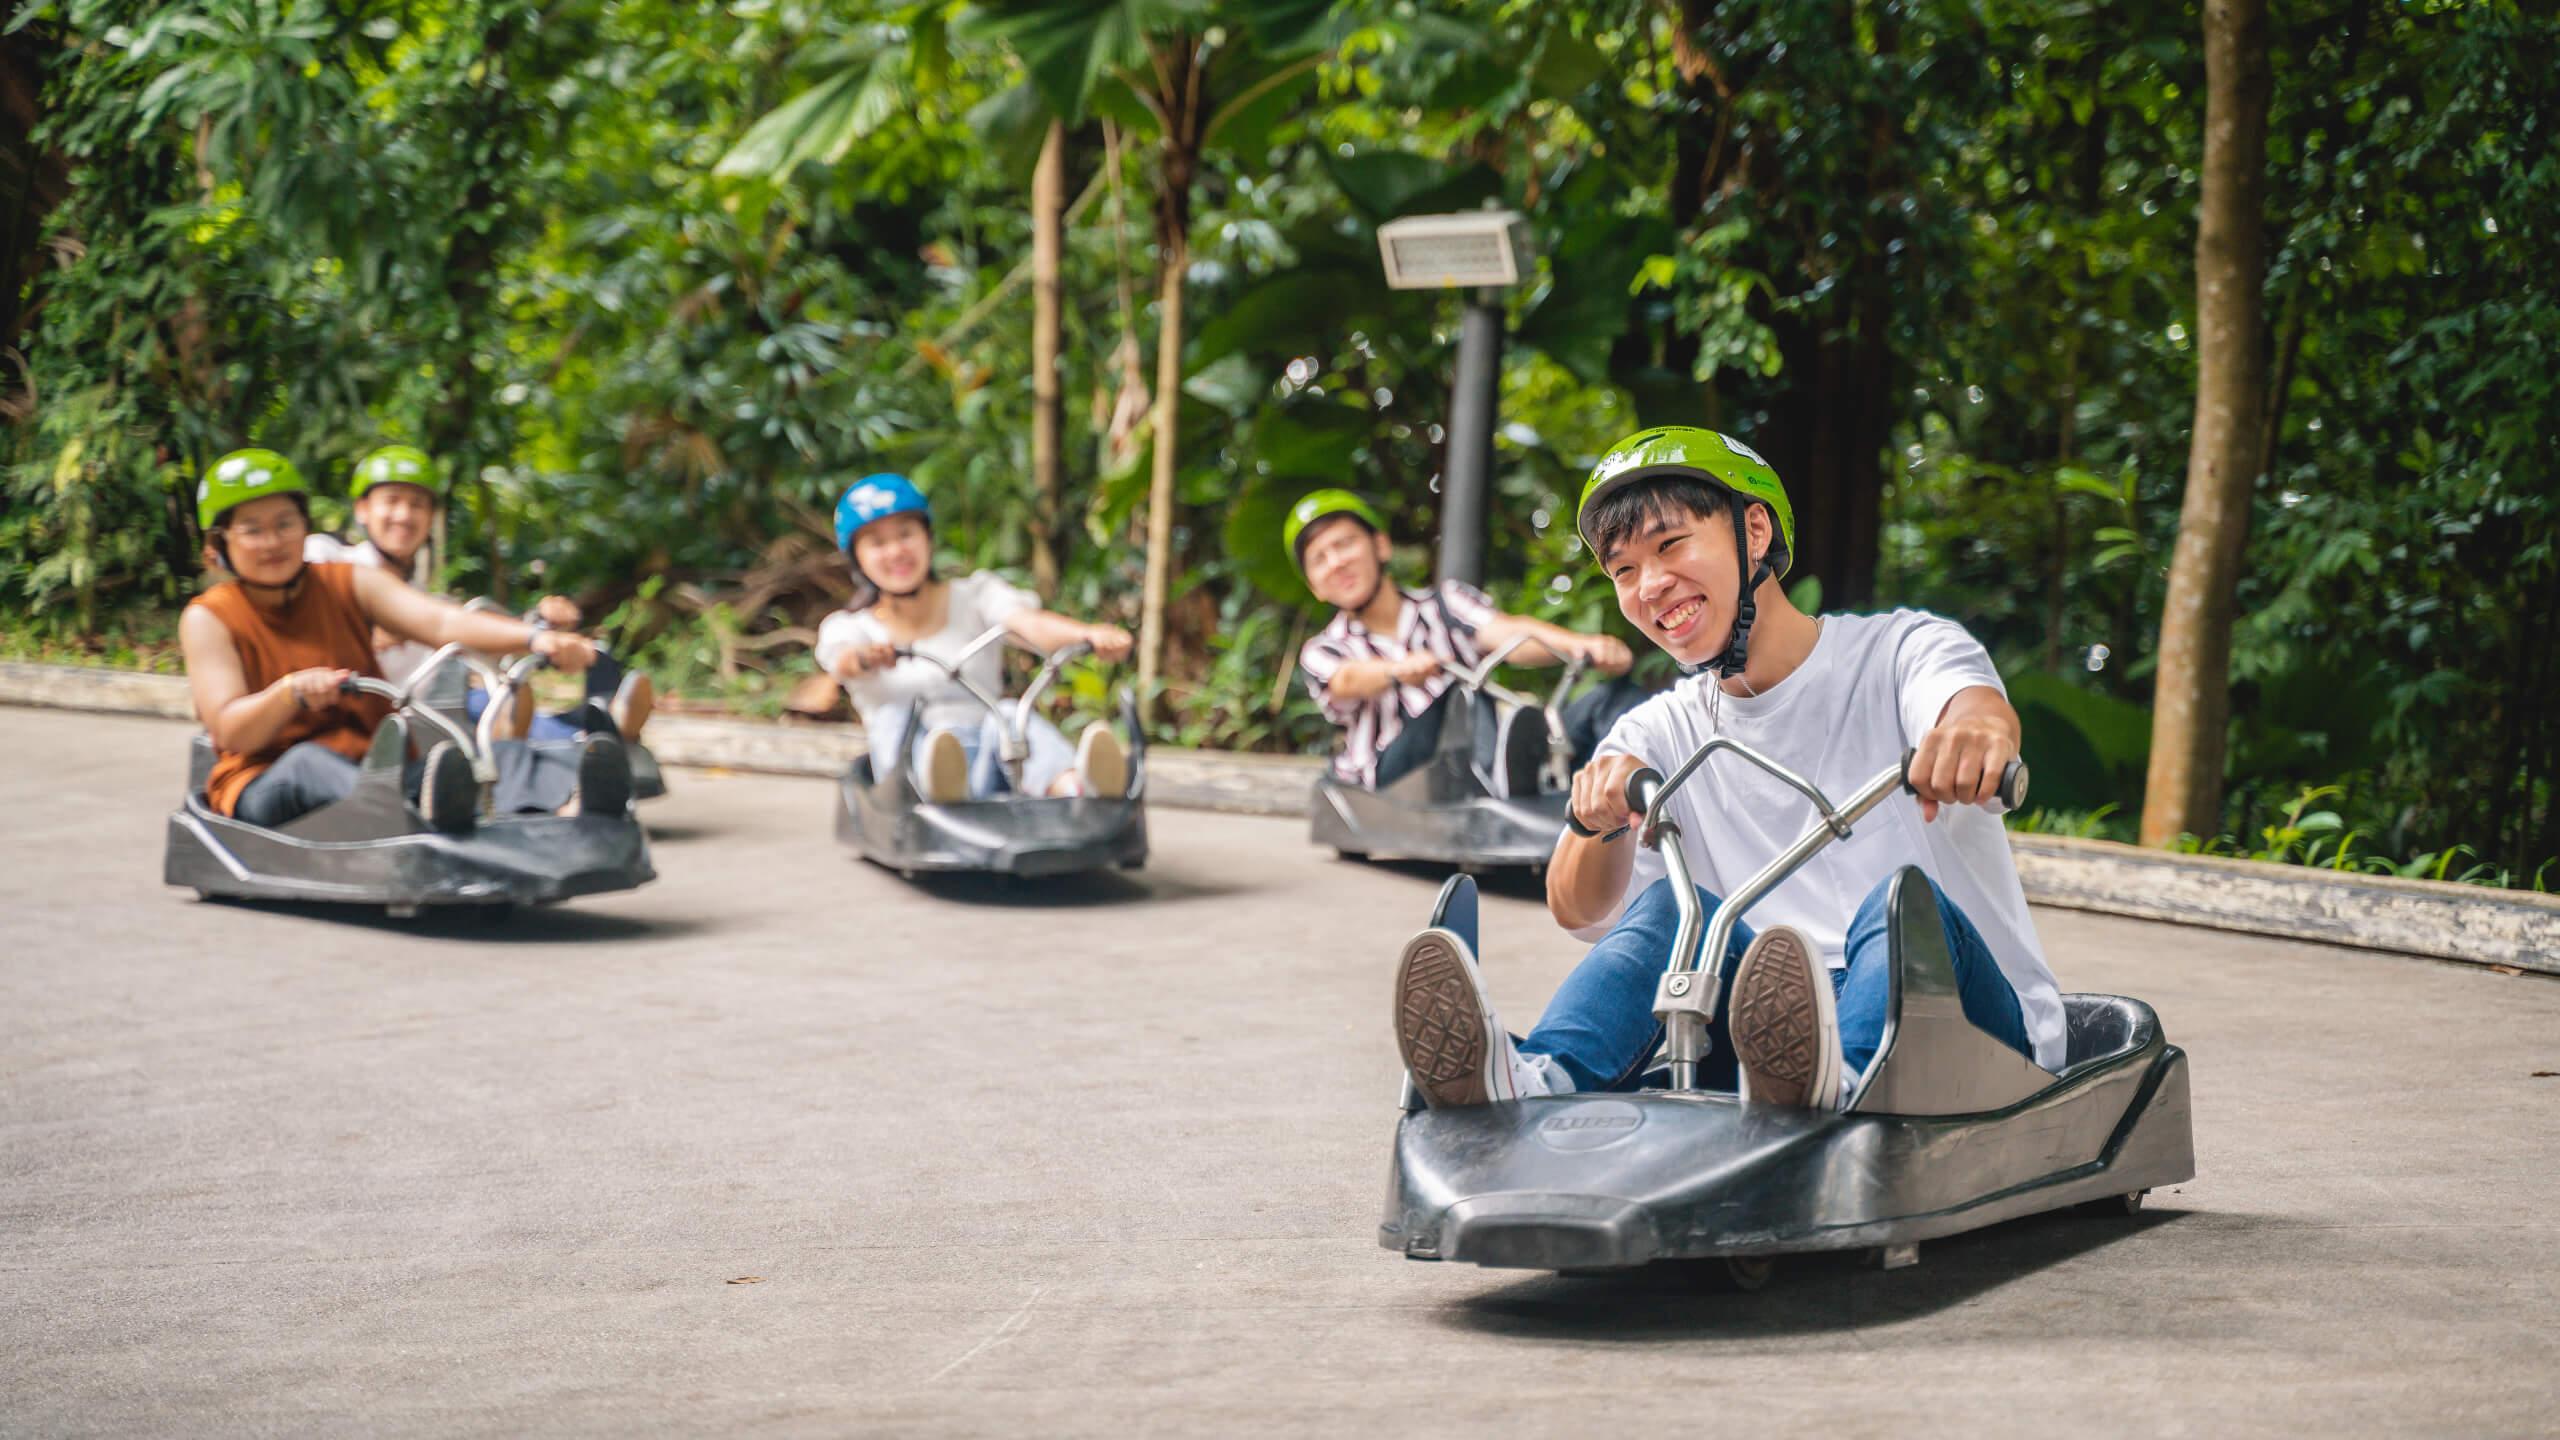 Friends race each other down the Luge tracks in Singapore.